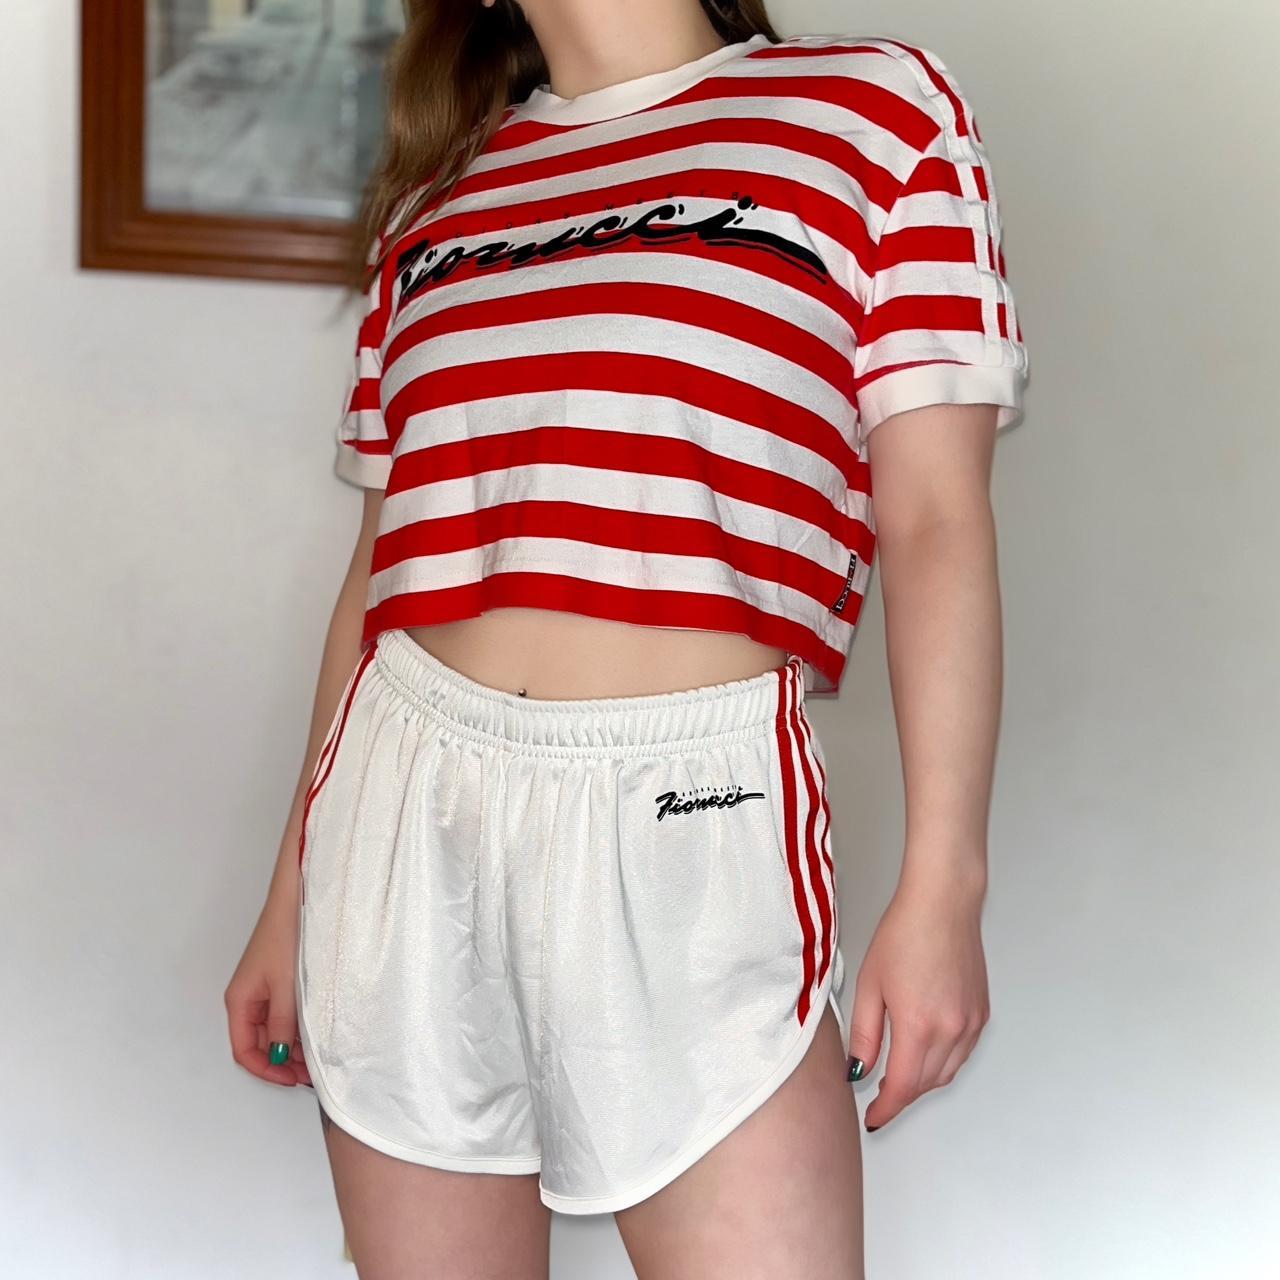 Fiorucci Women's Red and White Shorts